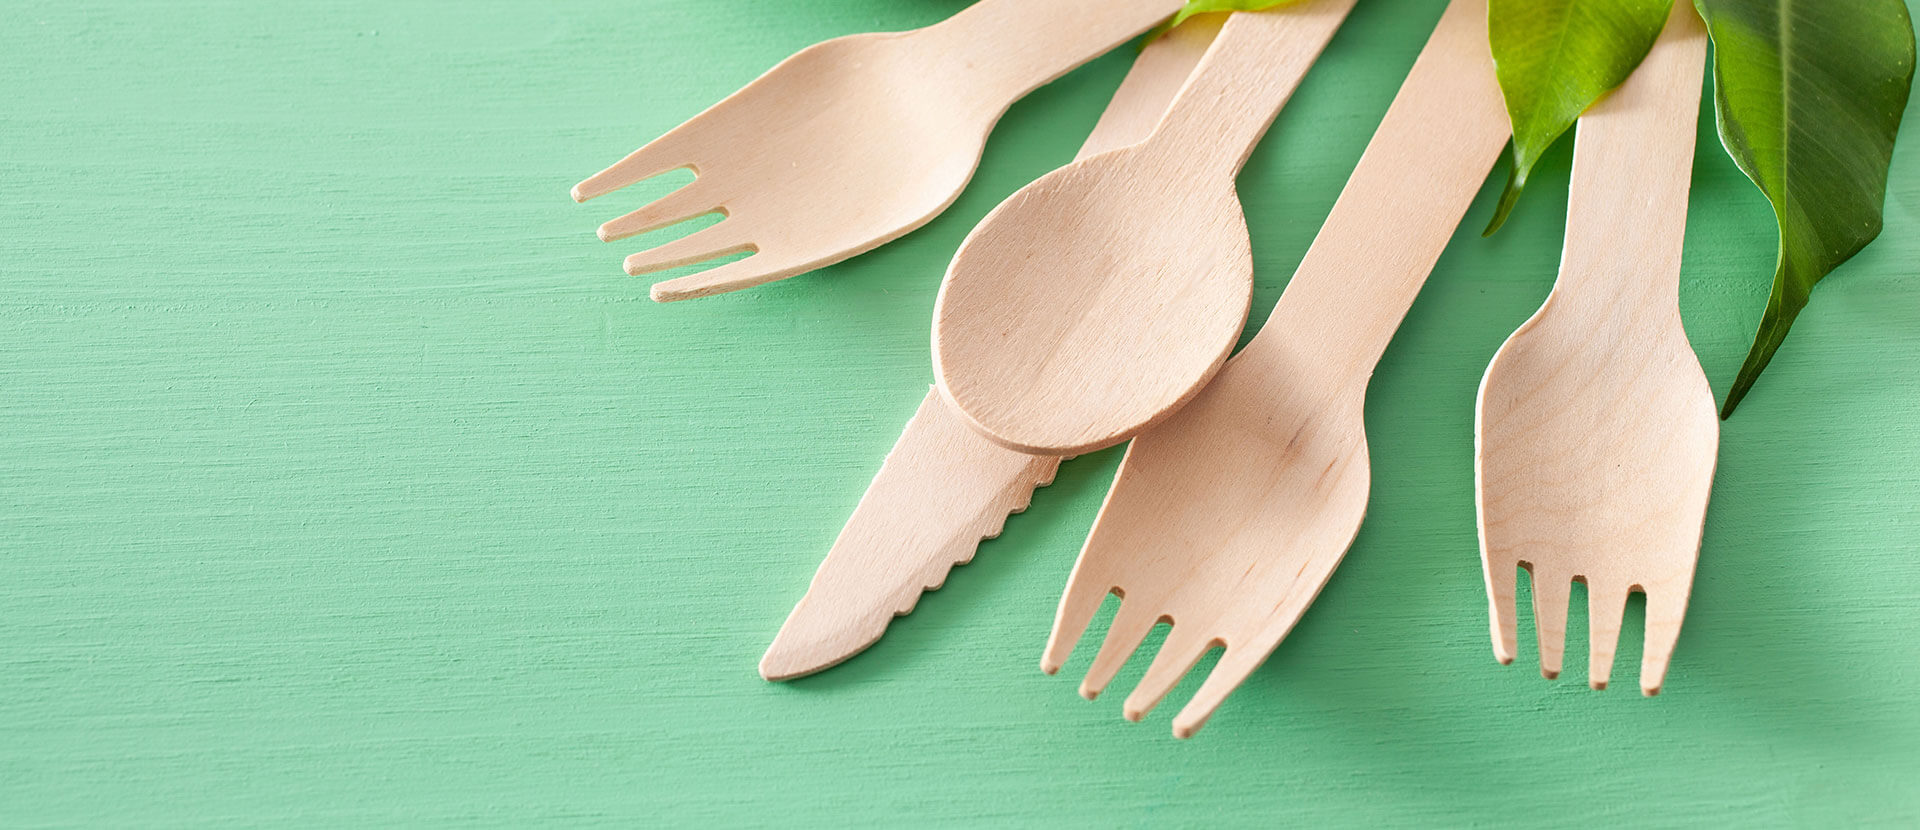 http://www.chinawood.es/img/product/banner-cutlery.jpg